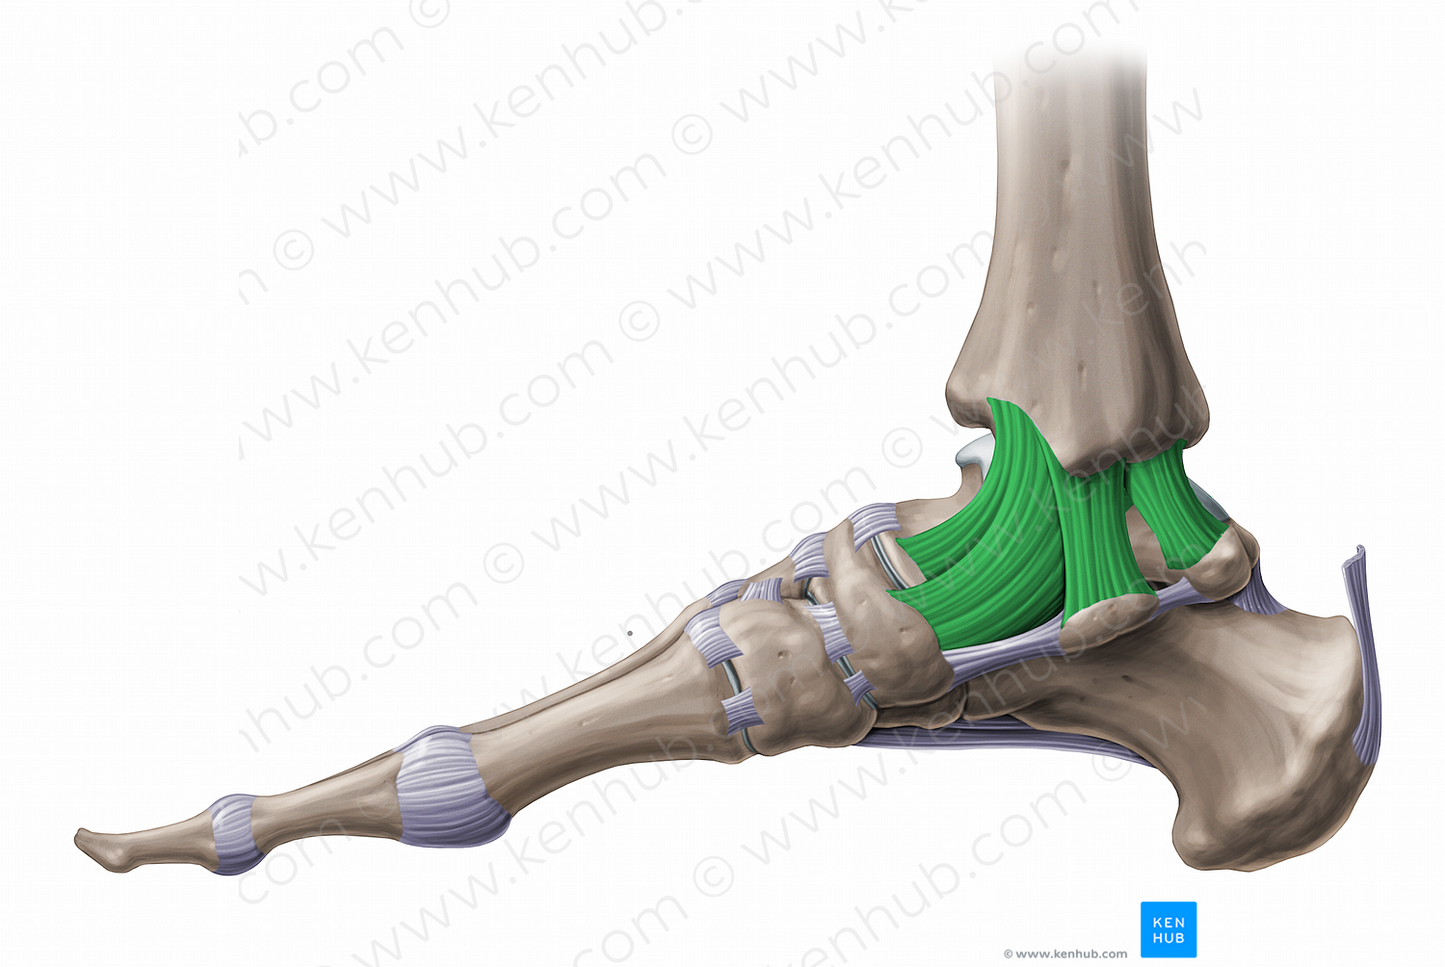 Medial collateral ligament of ankle joint (#11598)